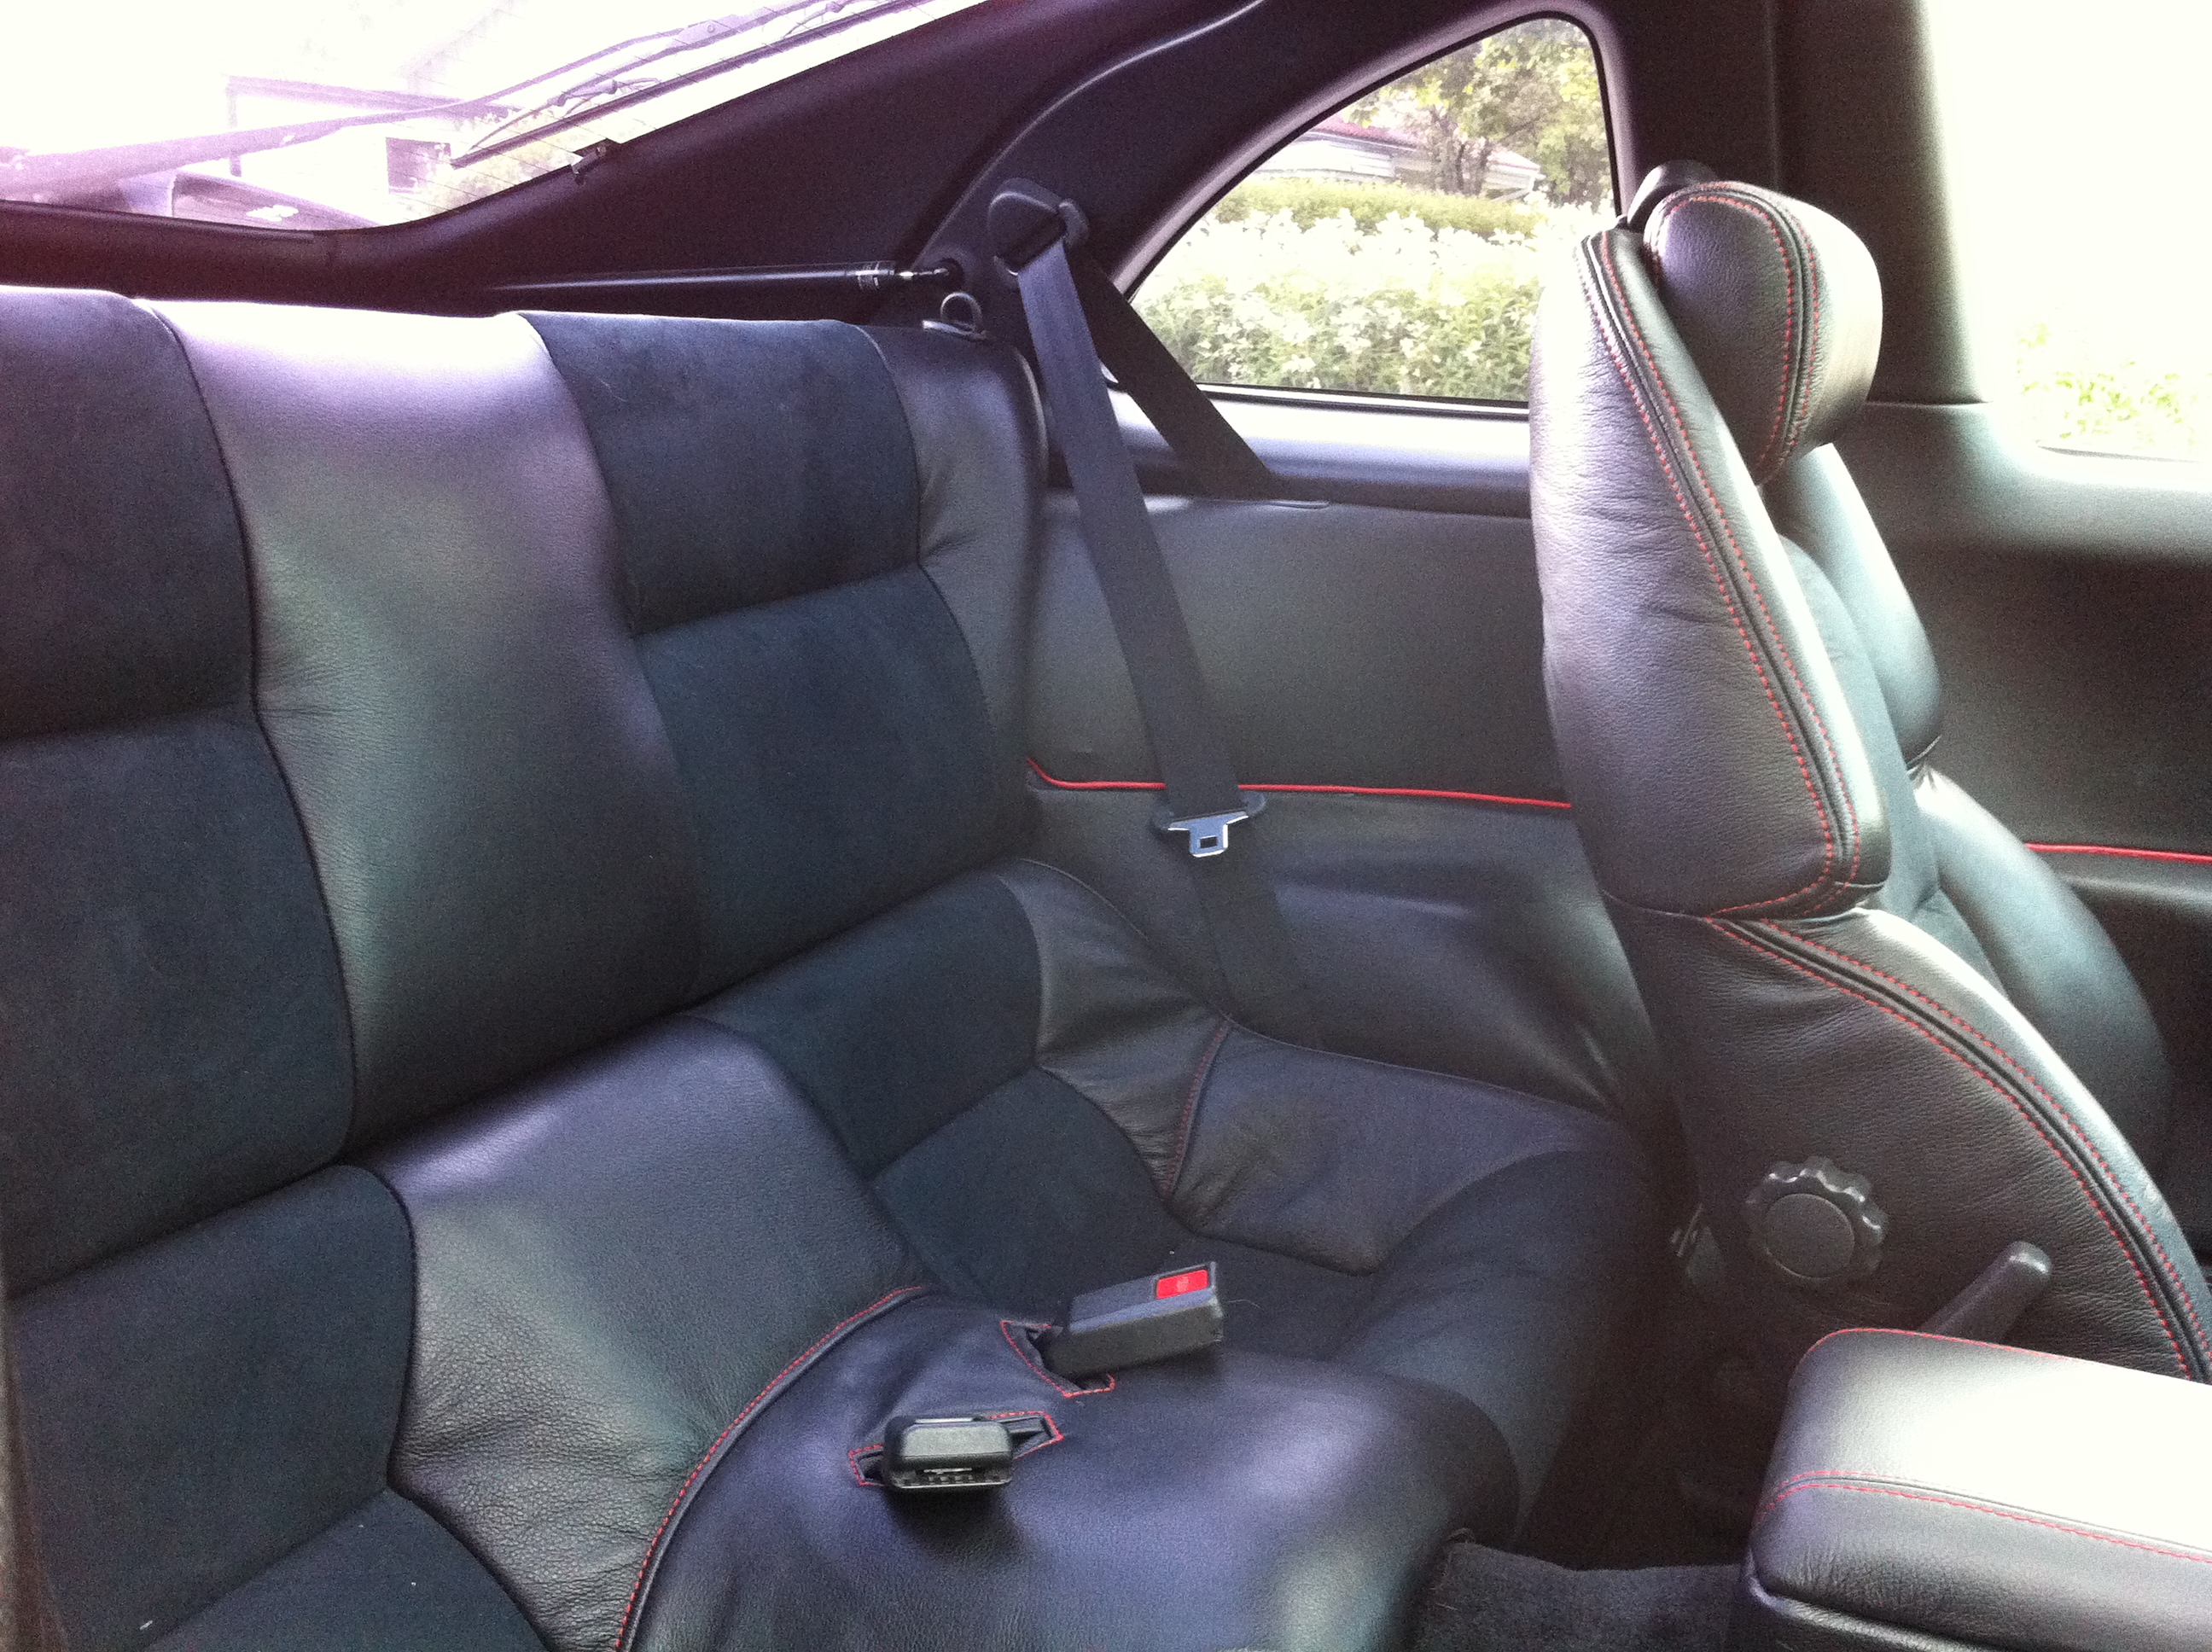 1986 Nissan 300zx seat covers #9